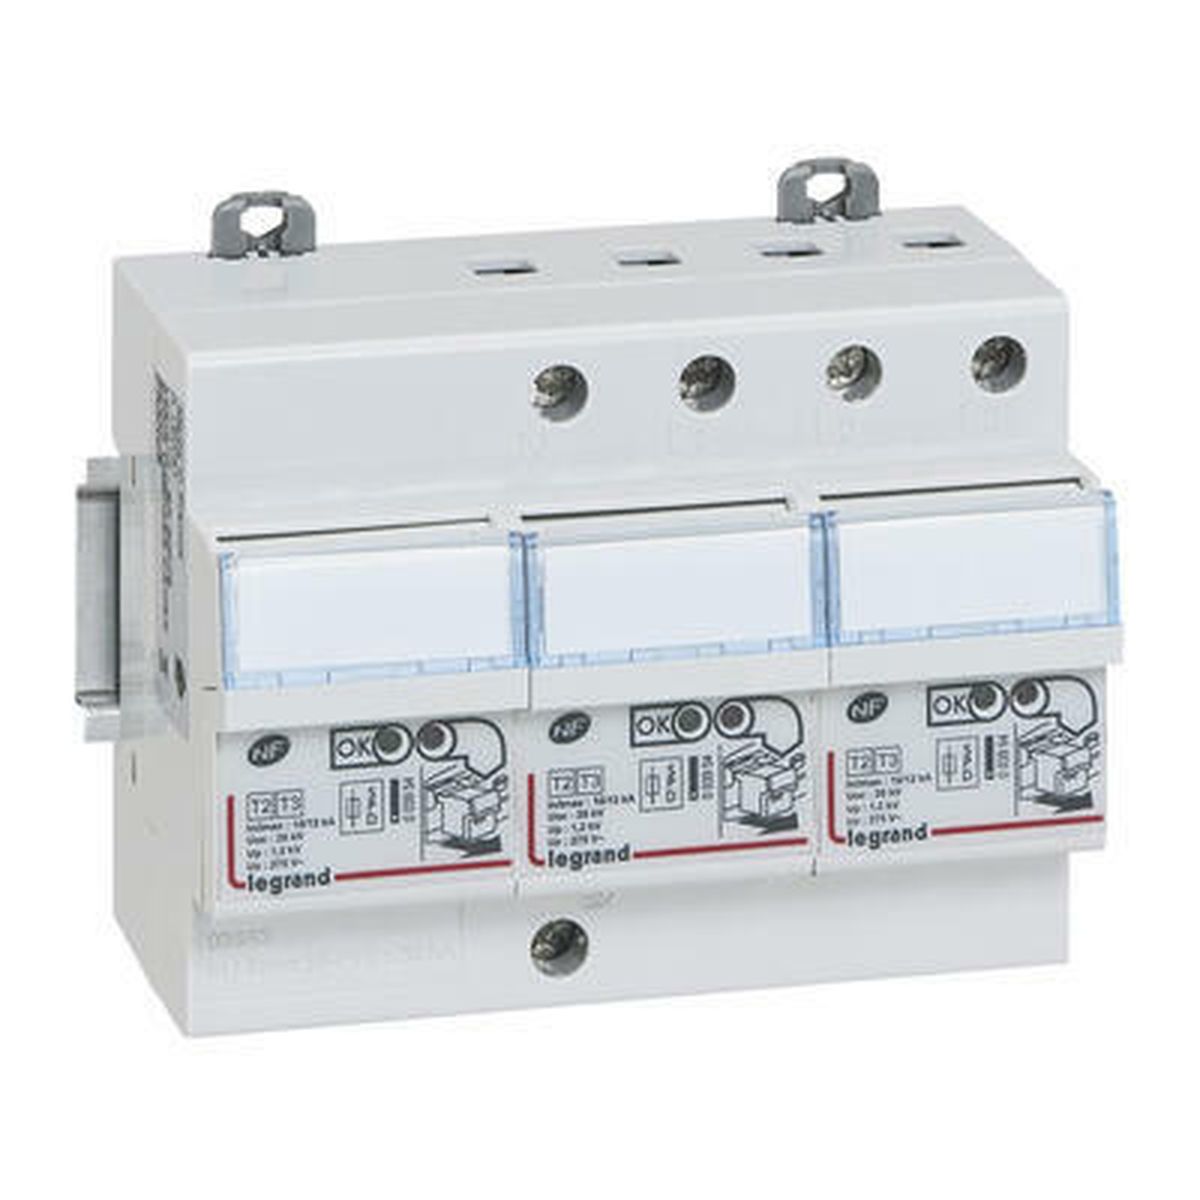 003953 - Self-protected and withdrawable four-pole surge arrester type 2 12kA 230V - Legrand - 0